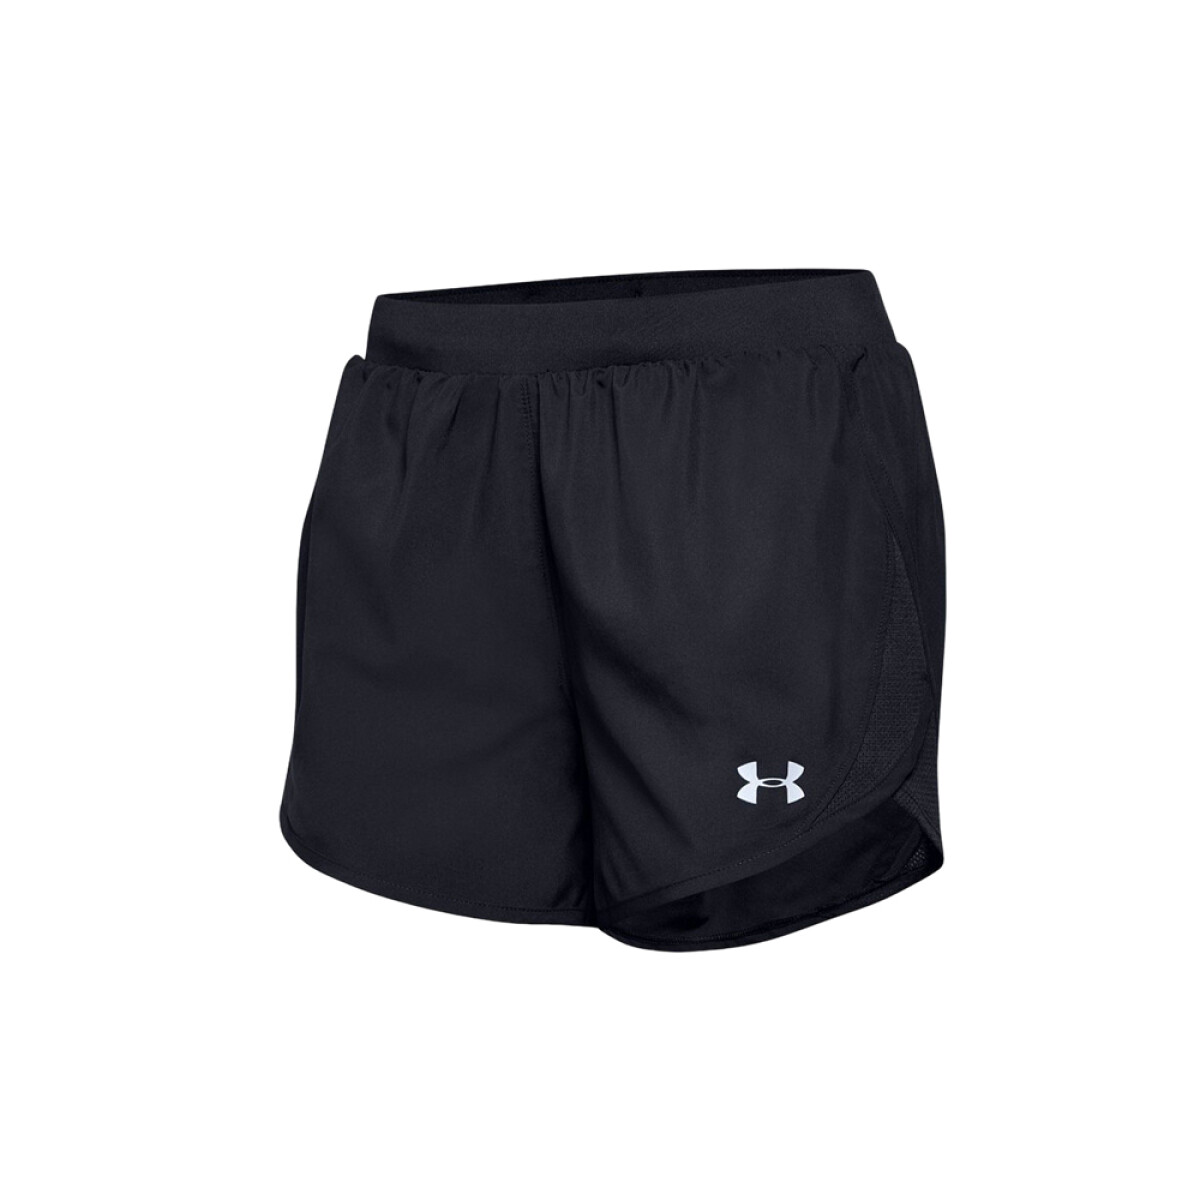 SHORT UNDER ARMOUR UA FLY BY 2.0 - Black 